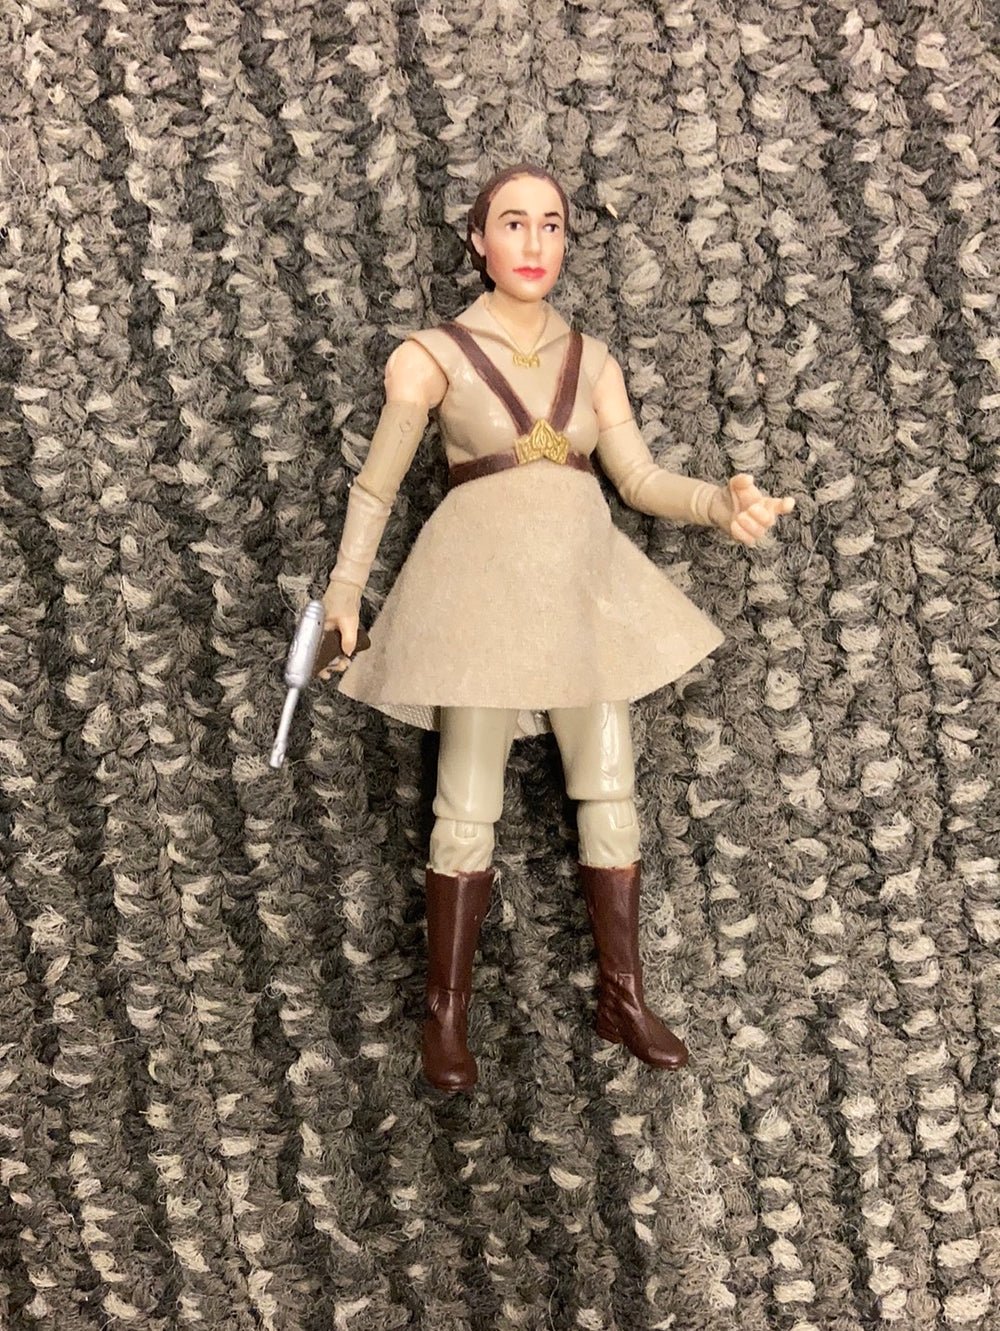 Star Wars 3.75 revenge of the sith Padme